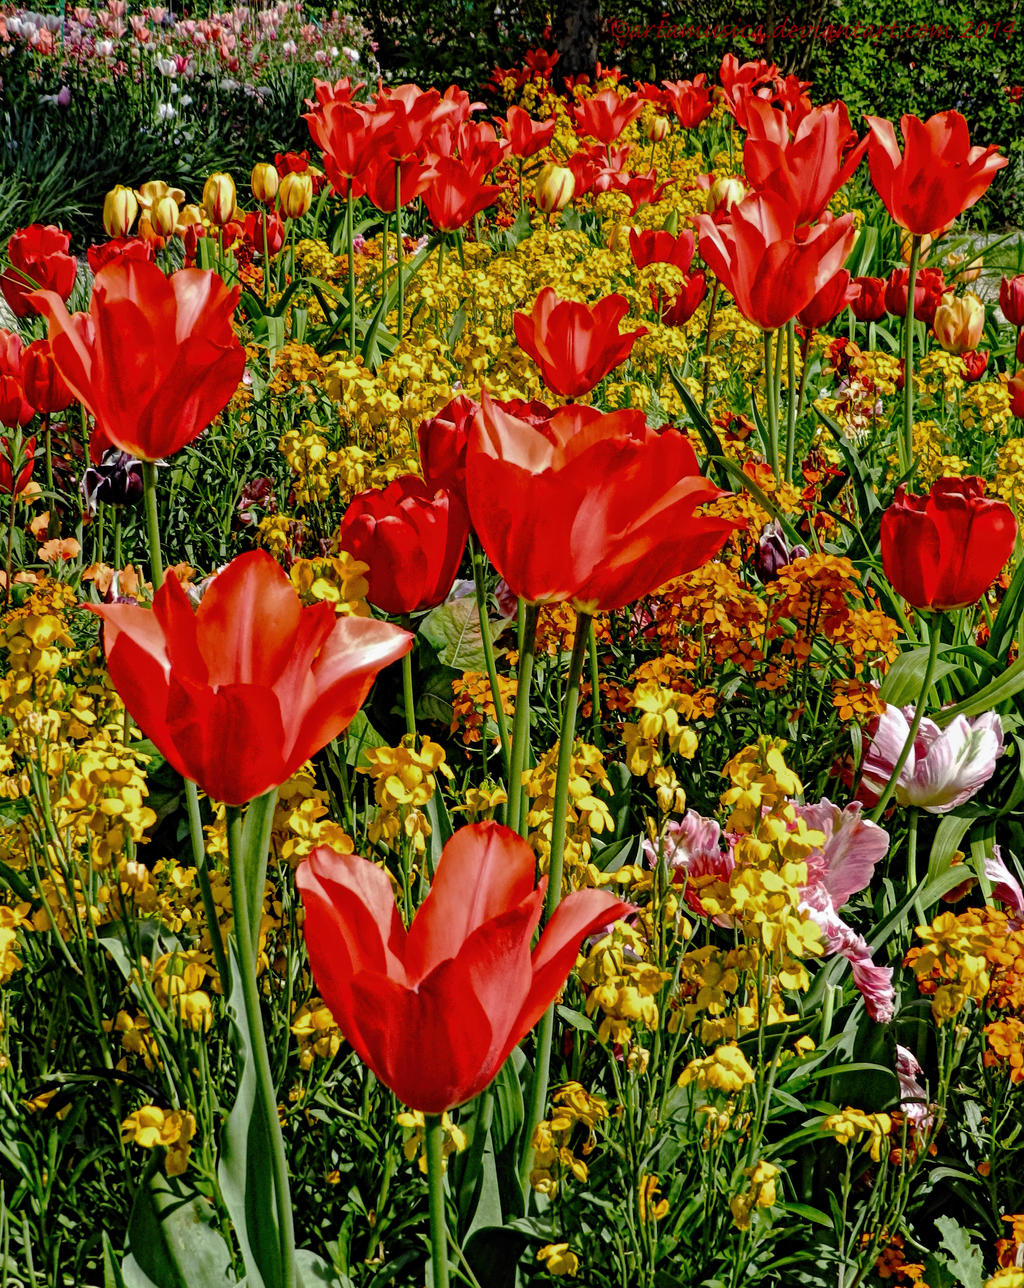 Reds and Yellows in Monet's garden at Giverny